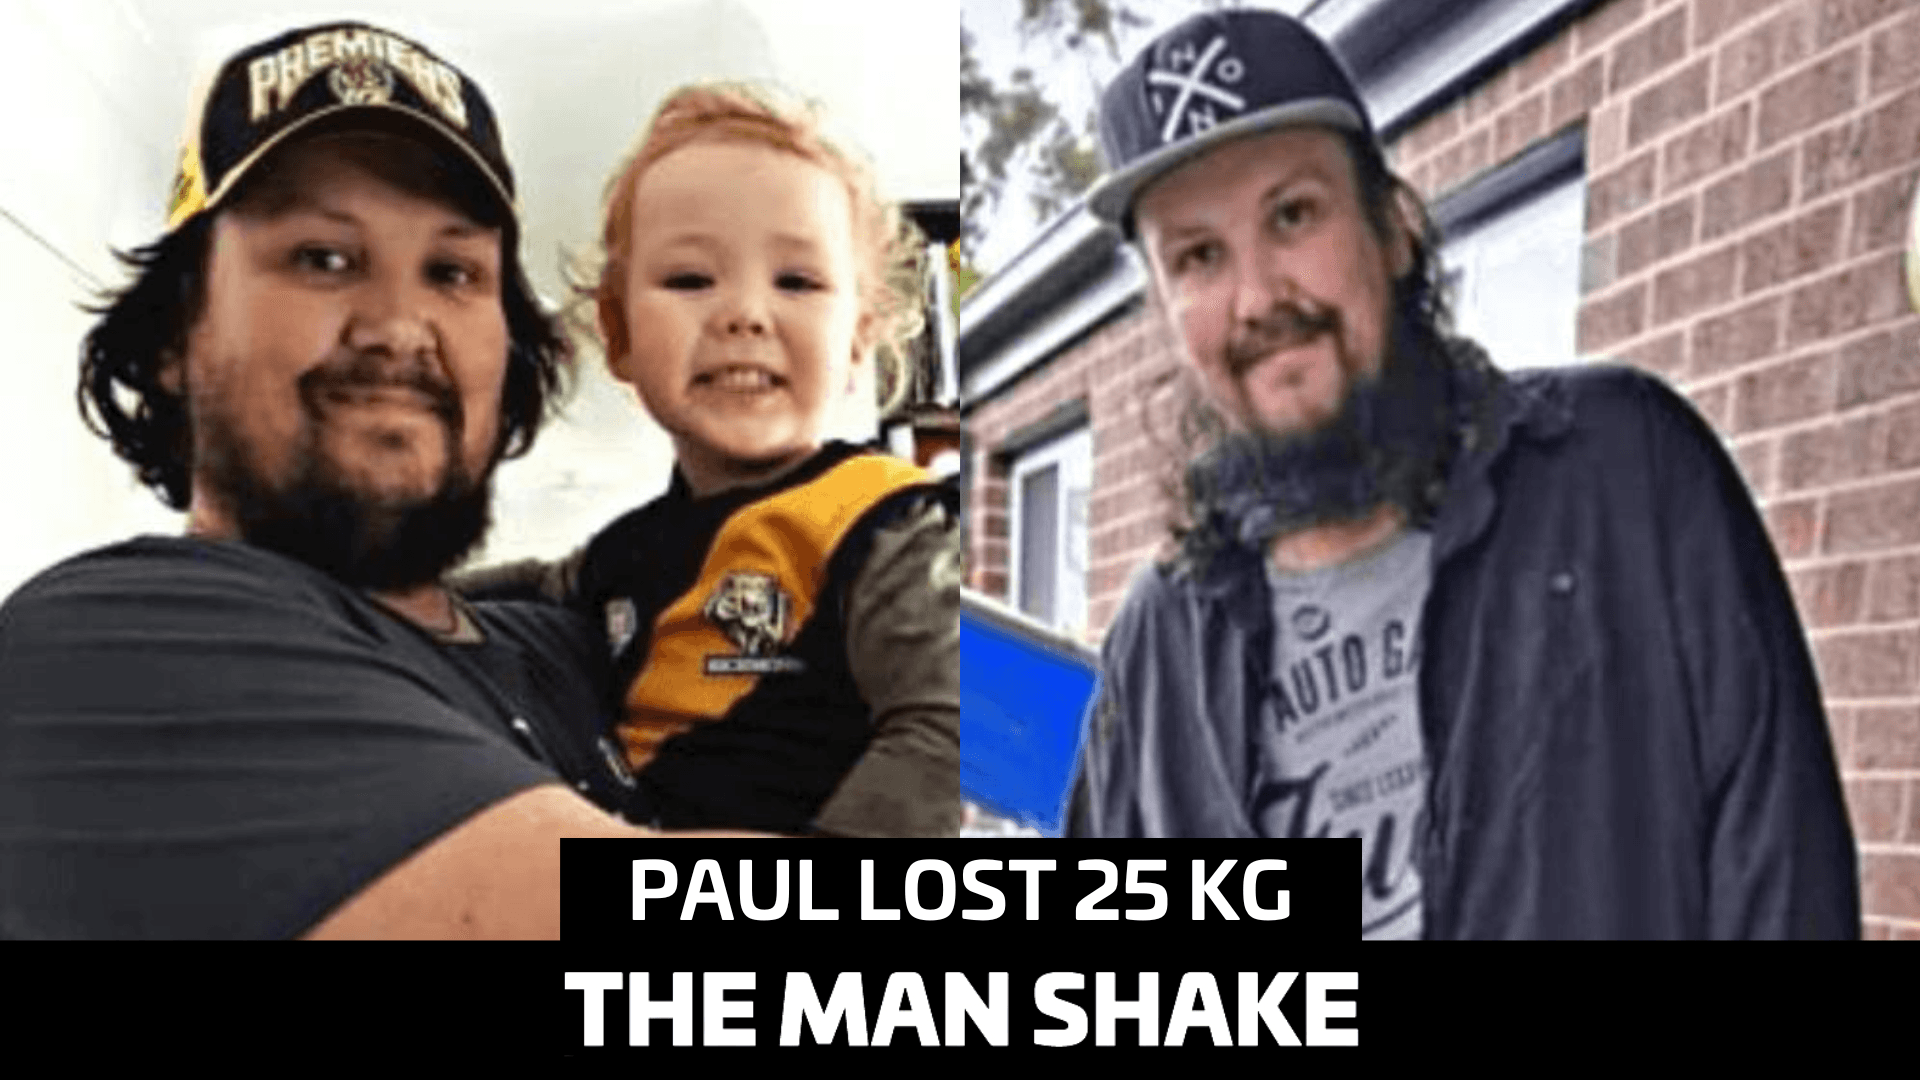 Paul hated being in photos until he lost 25kg